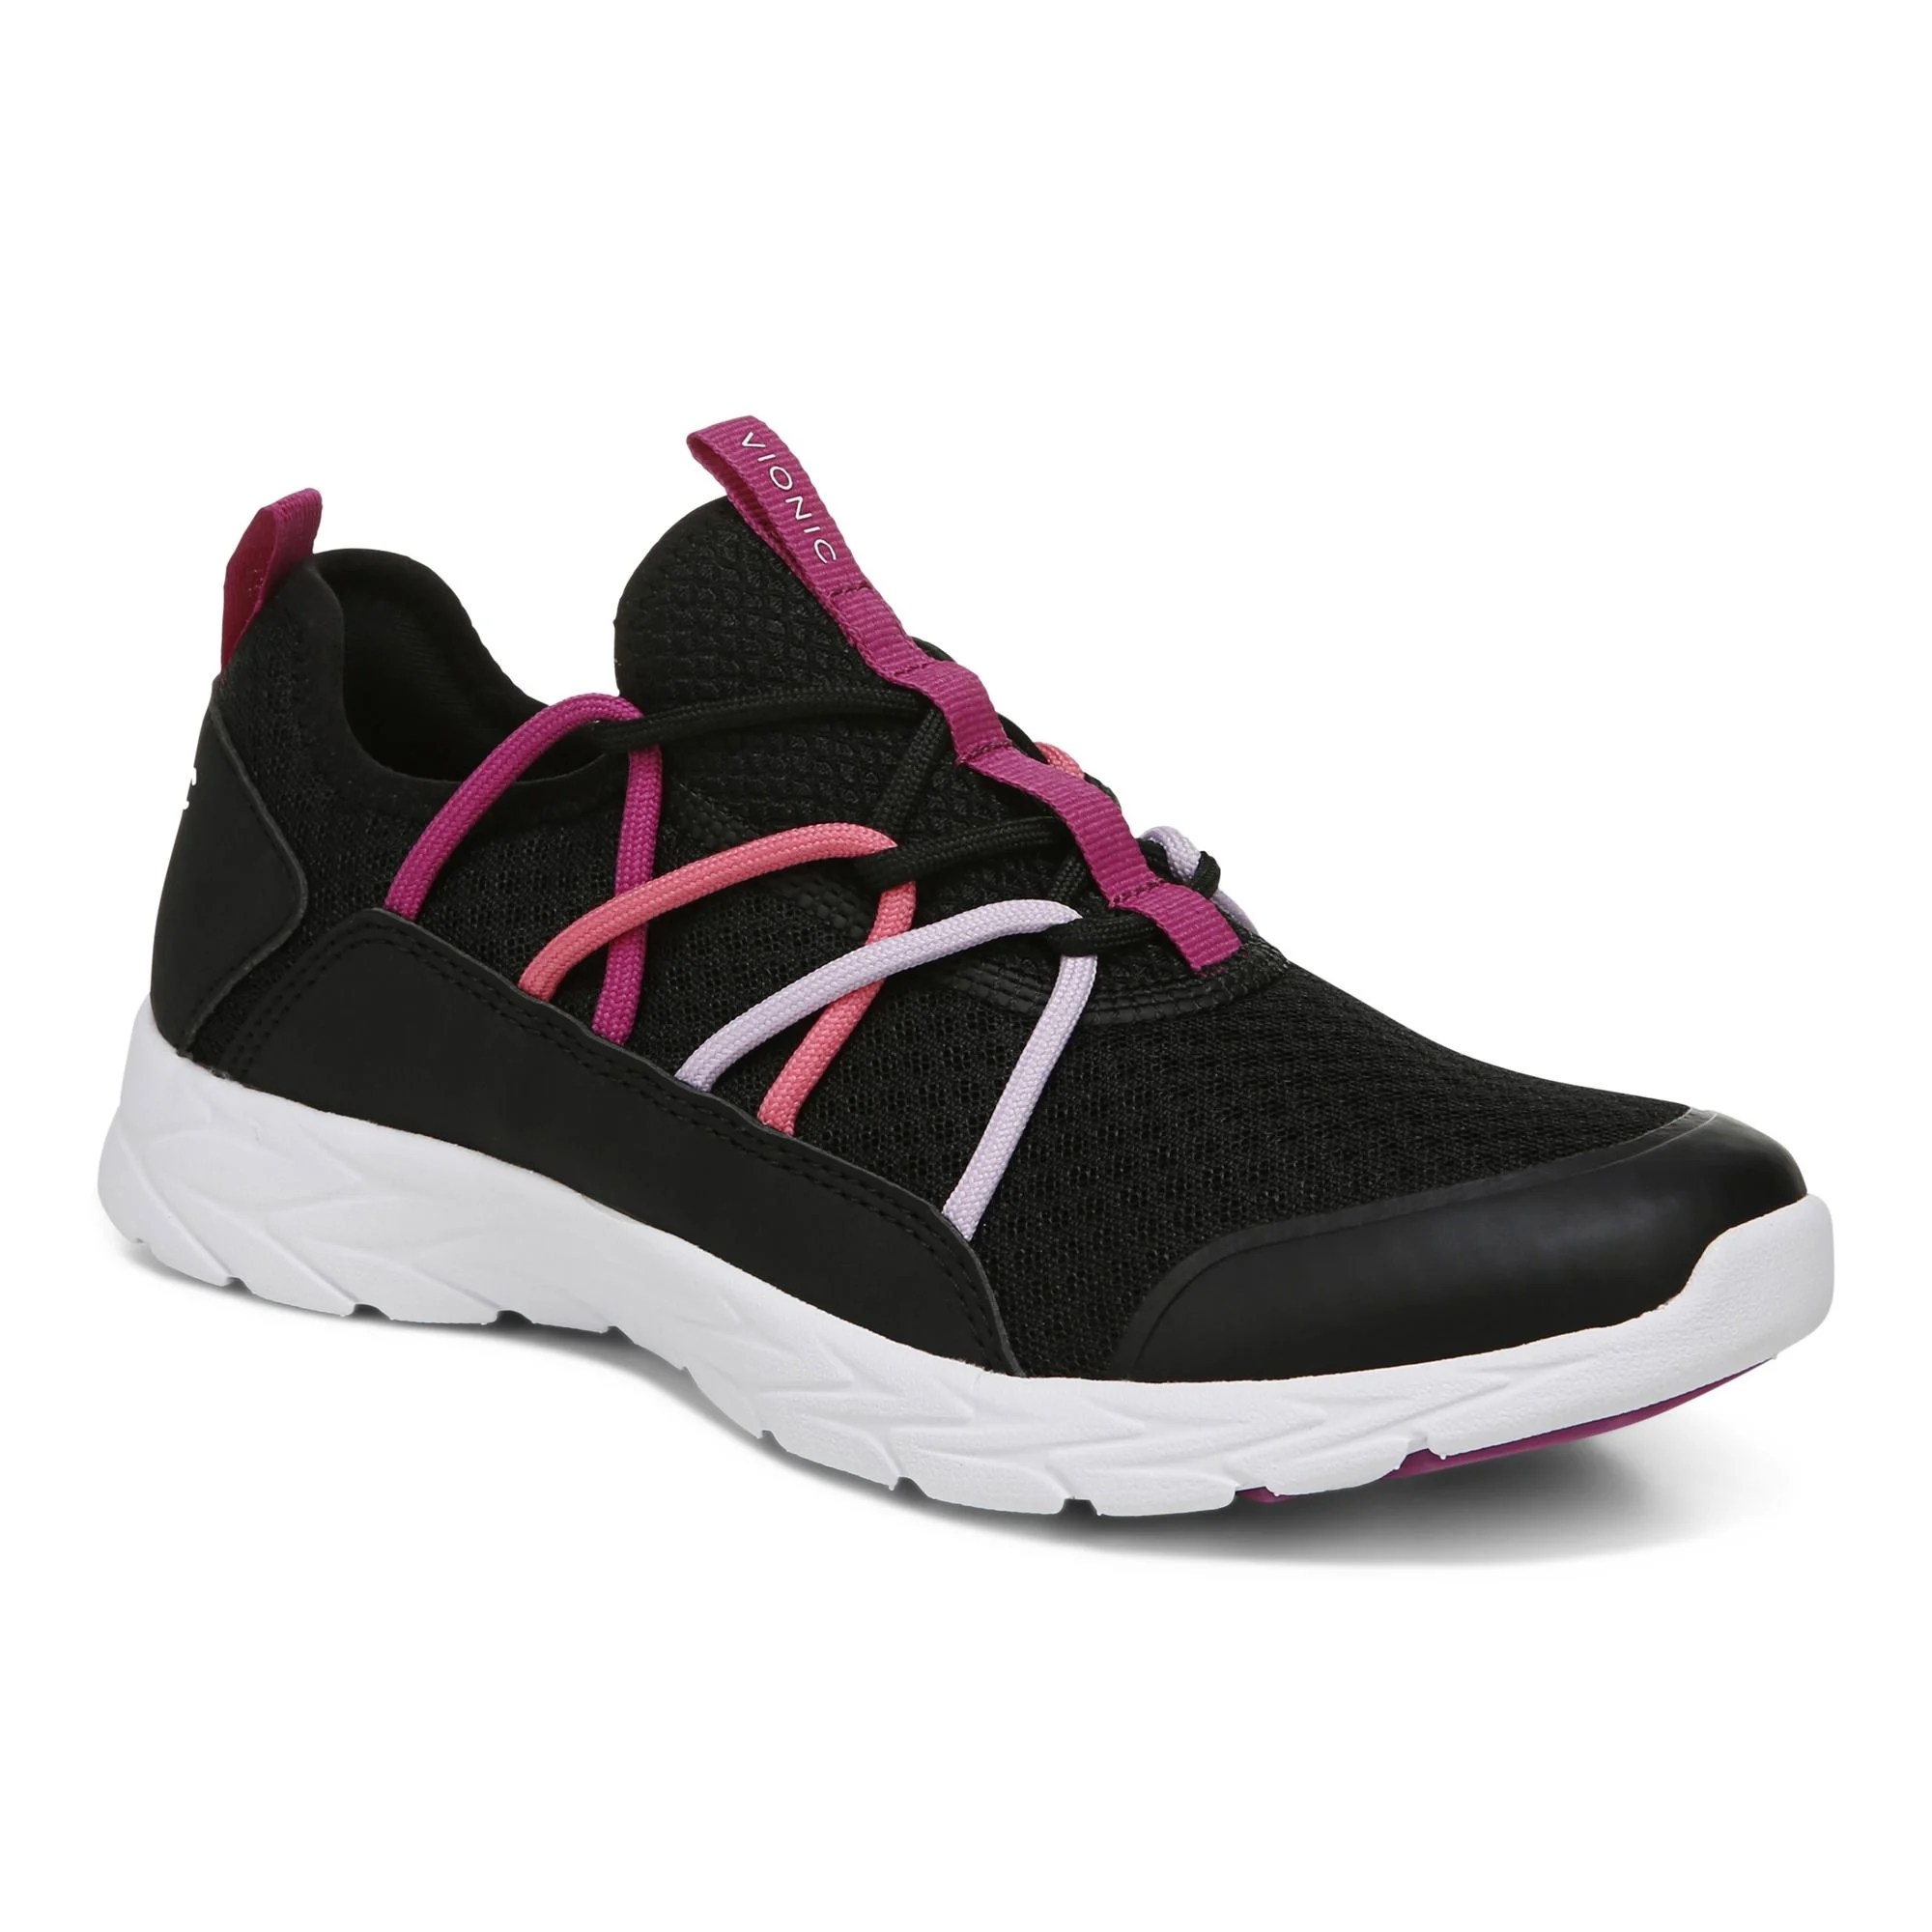 a pair of black sneakers with pink and white elastic bands from Vionic